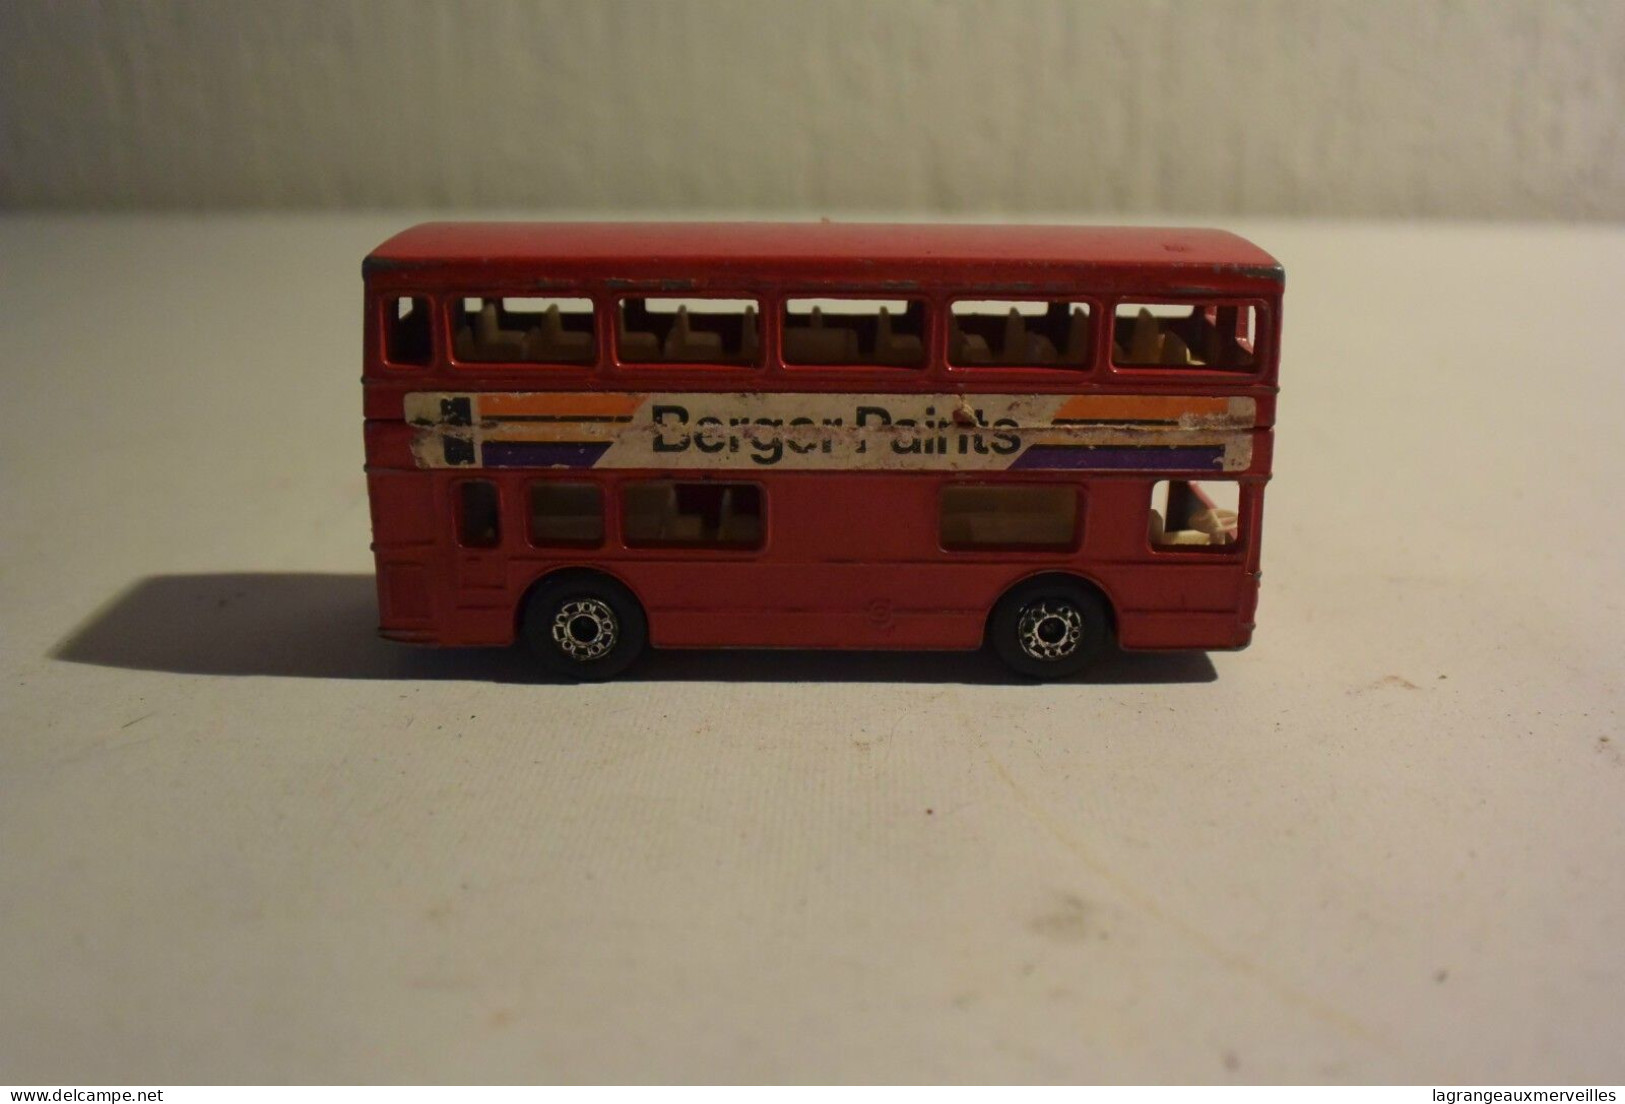 C38 Ancienne Voiture Matchbox The Londoner 1972 Made In England Lesney Product - Matchbox